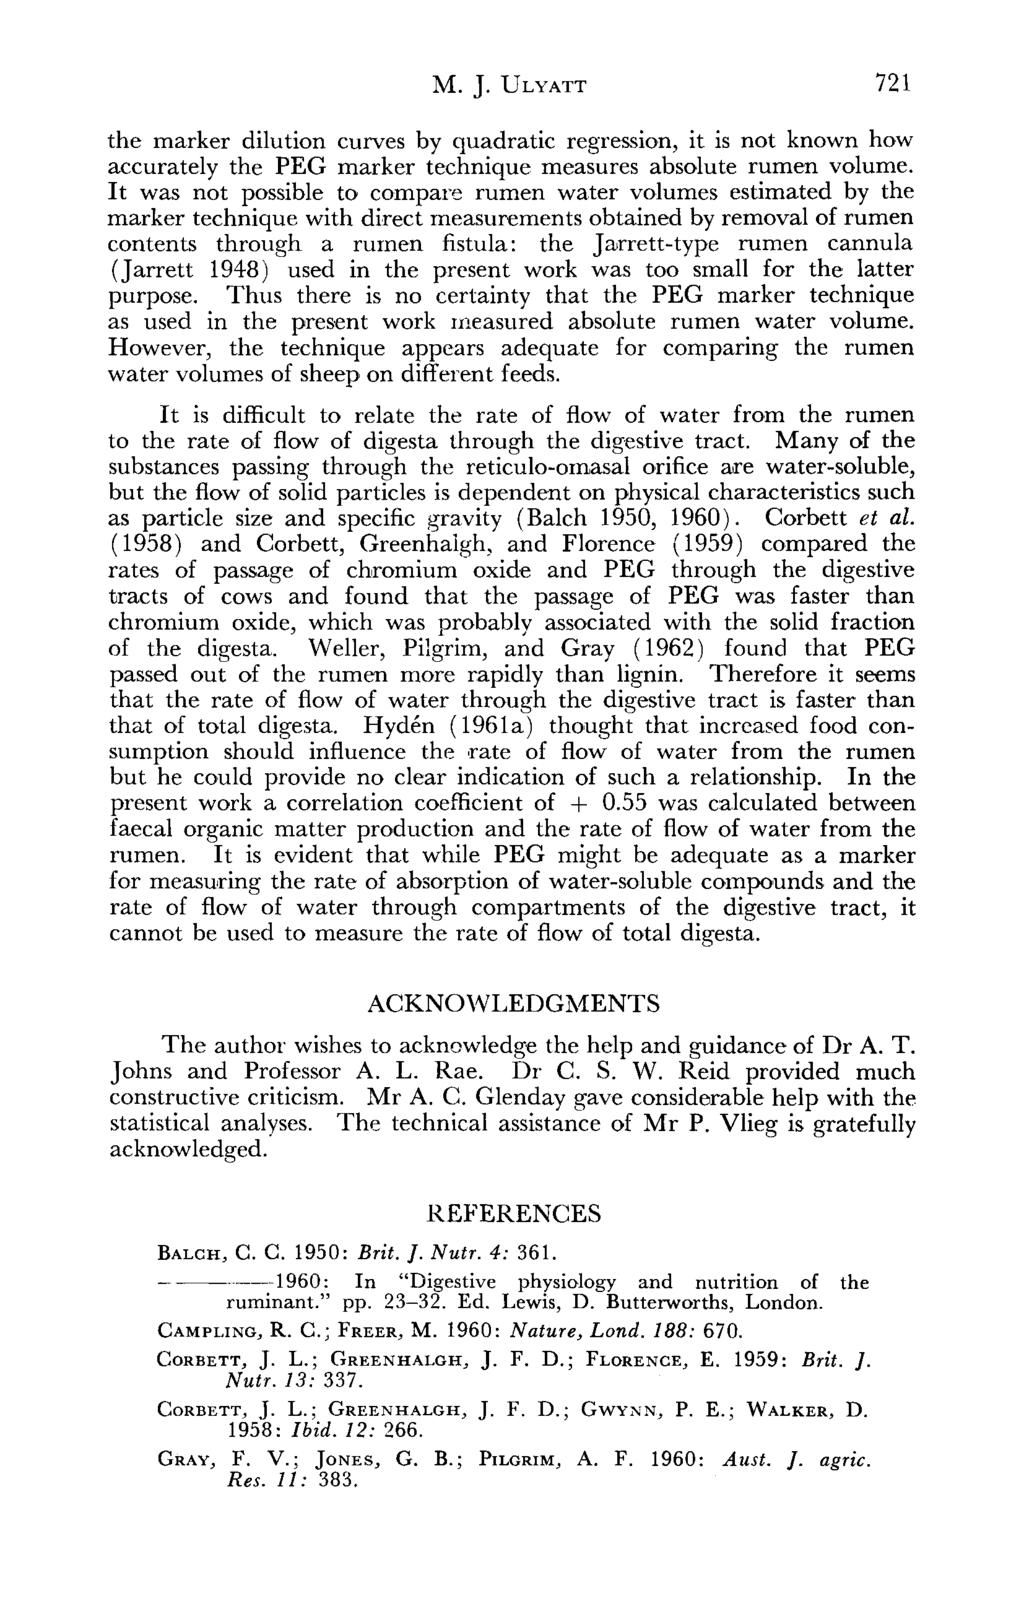 M. J. ULYATT 721 the marker dilution curves by quadratic regression, it is not known how accurately the PEG marker technique measures absolute rumen volume.